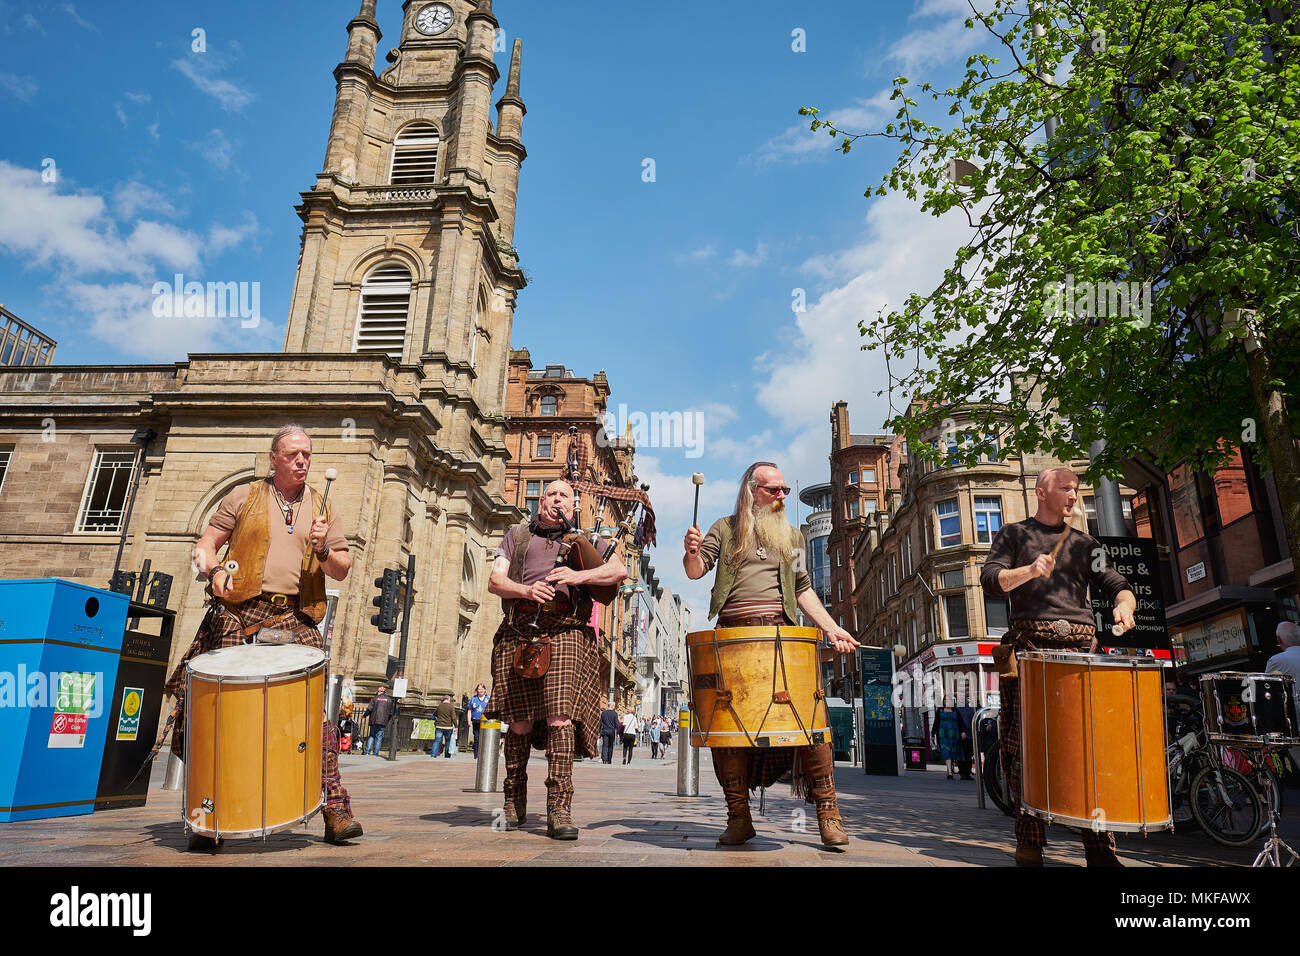 Caledonia Scottish Drummers & Bagpipers Buchanan Street Glasgow 2018,05 Alamy only Stock Photo